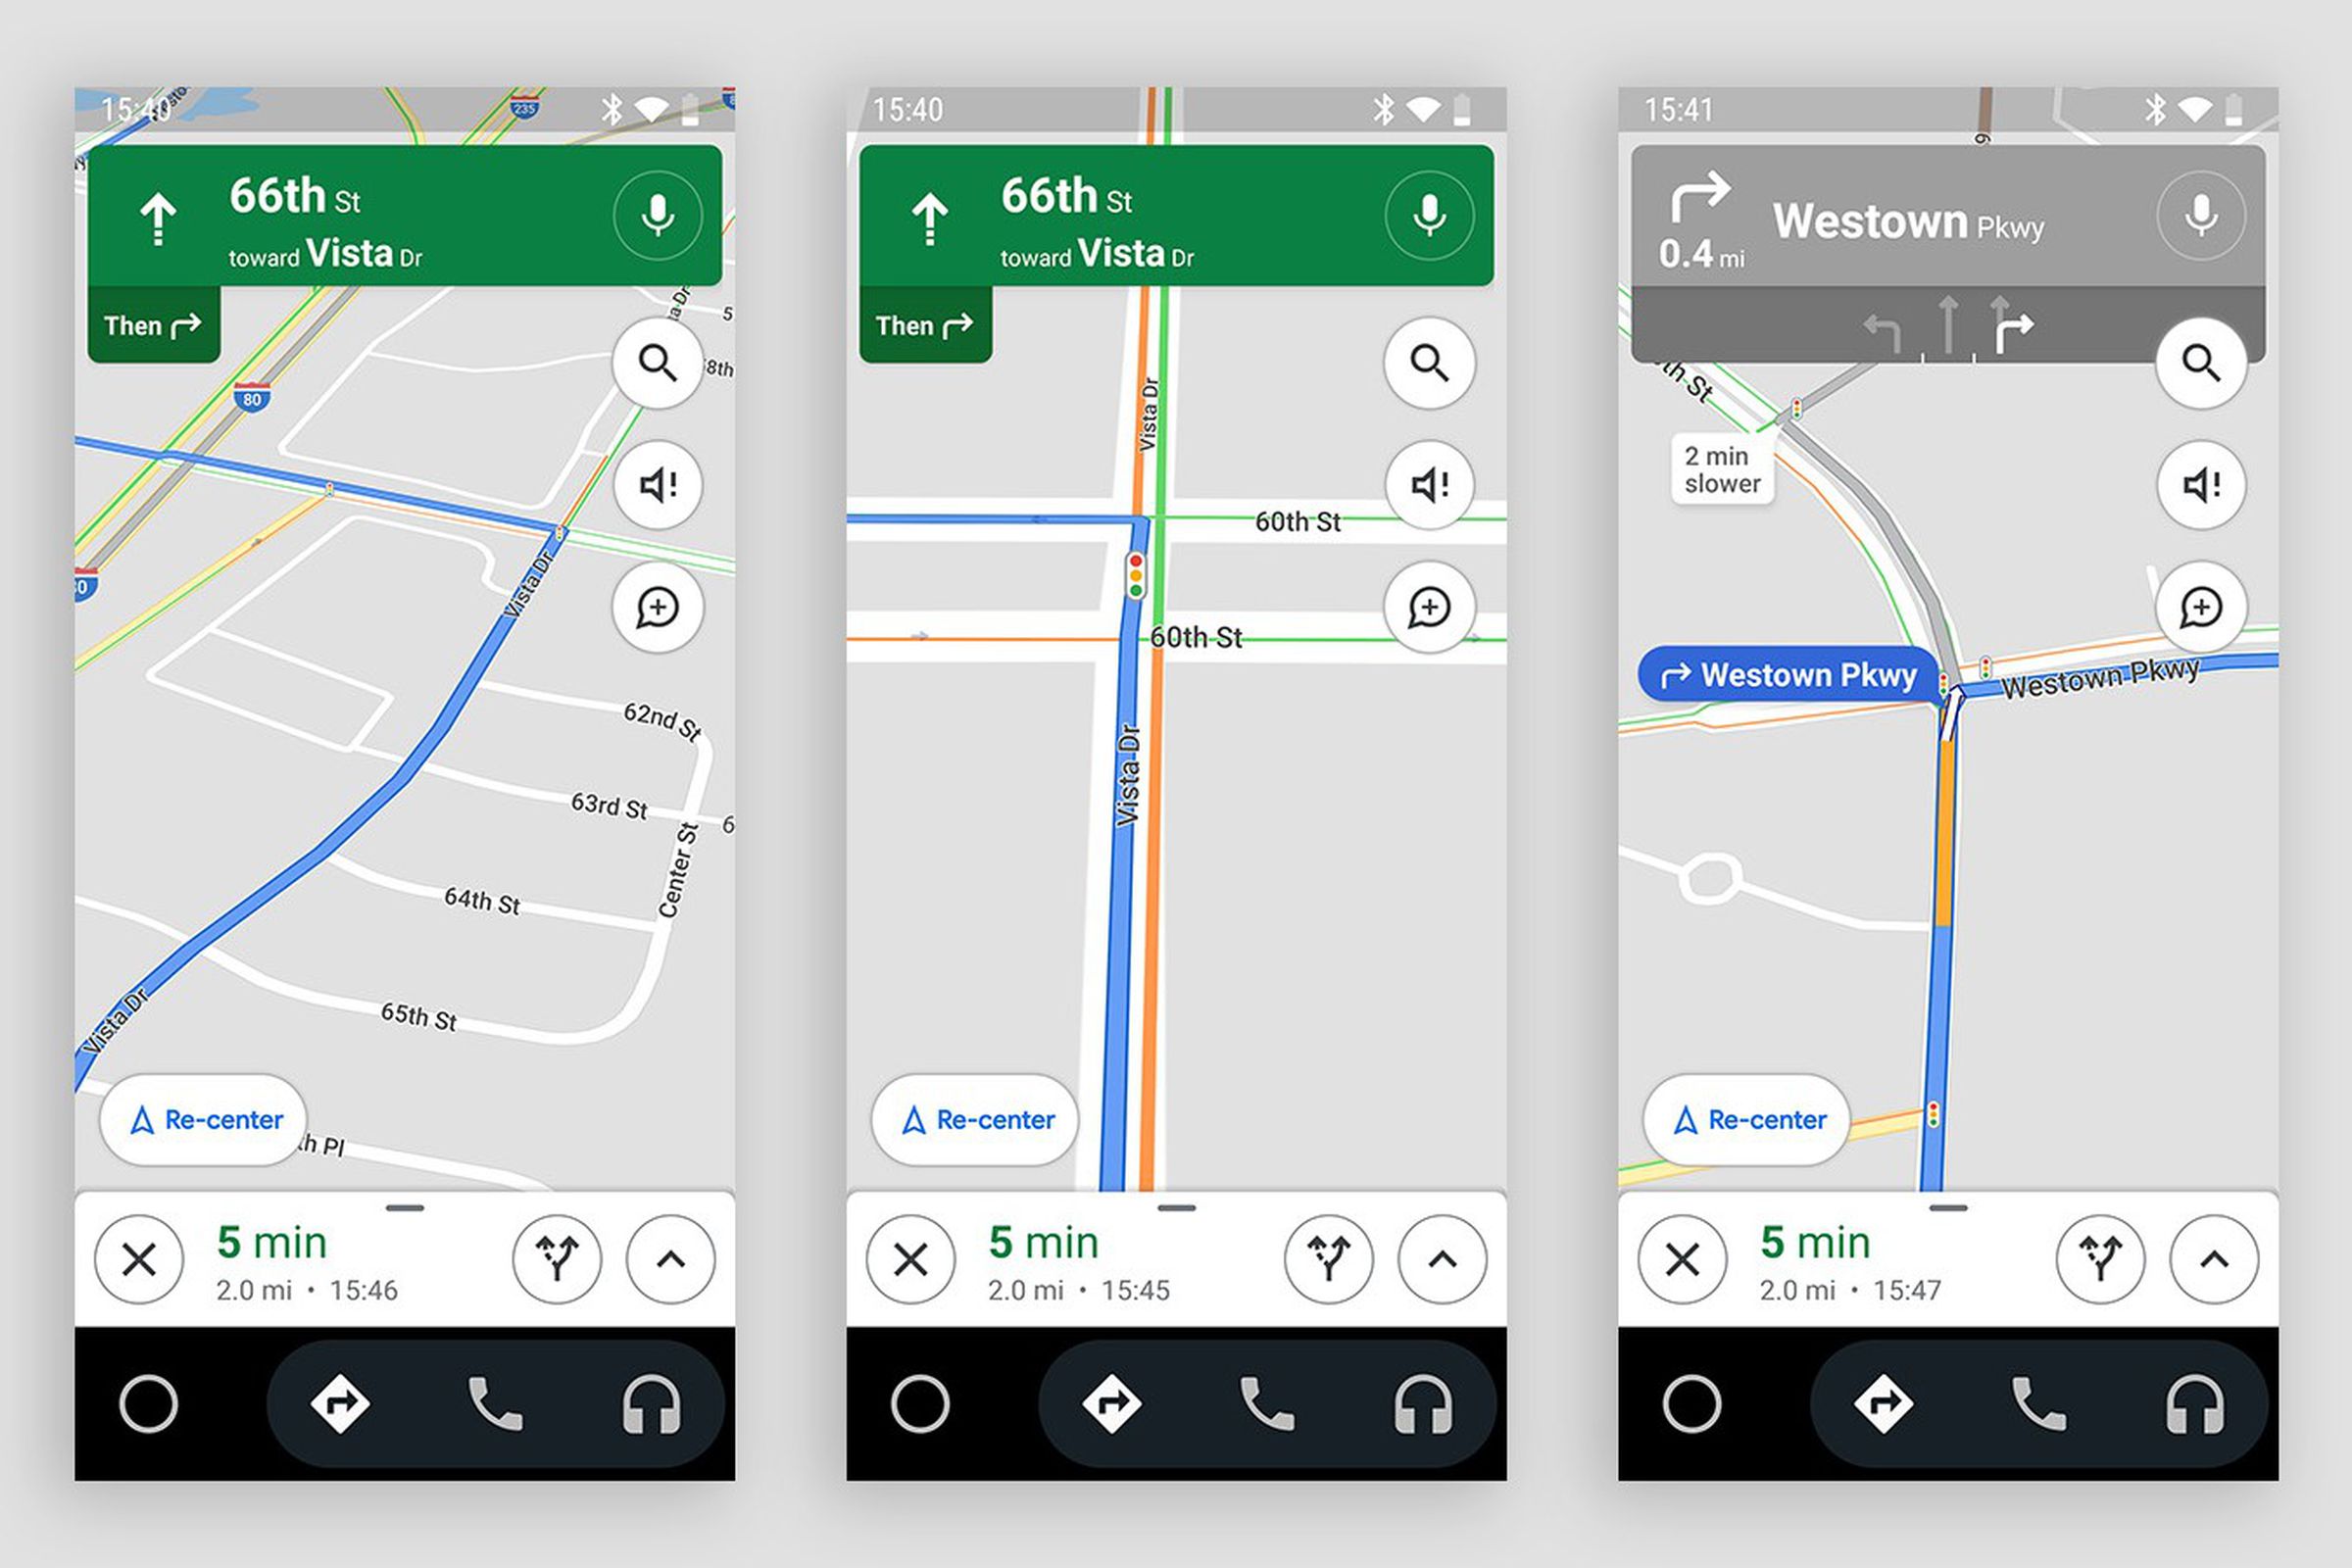 Google Maps screenshots show the traffic light symbol on various intersections.